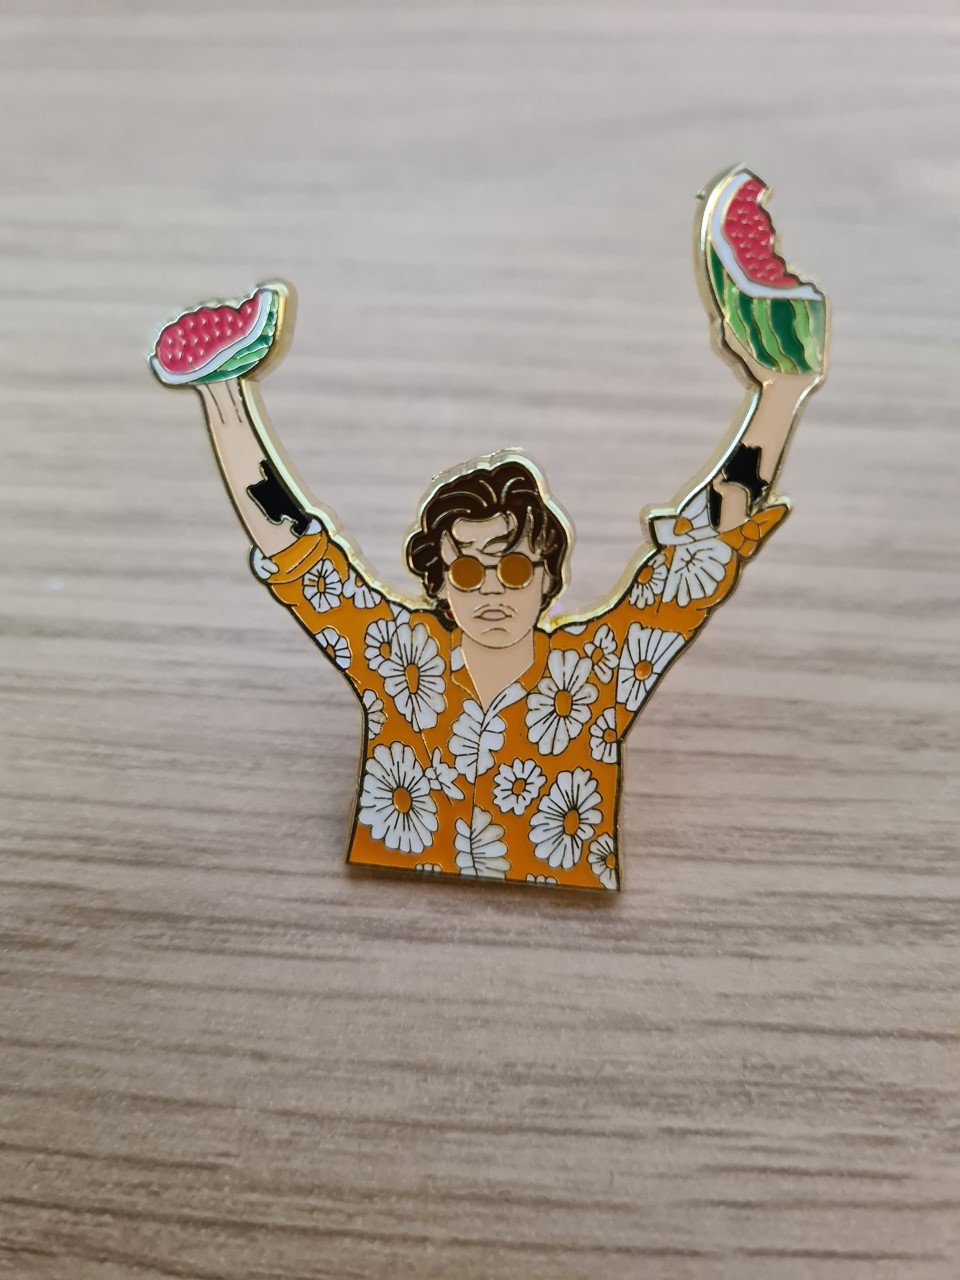 Harry Styles - Watermelon Sugar Limited Edition Pin Badge